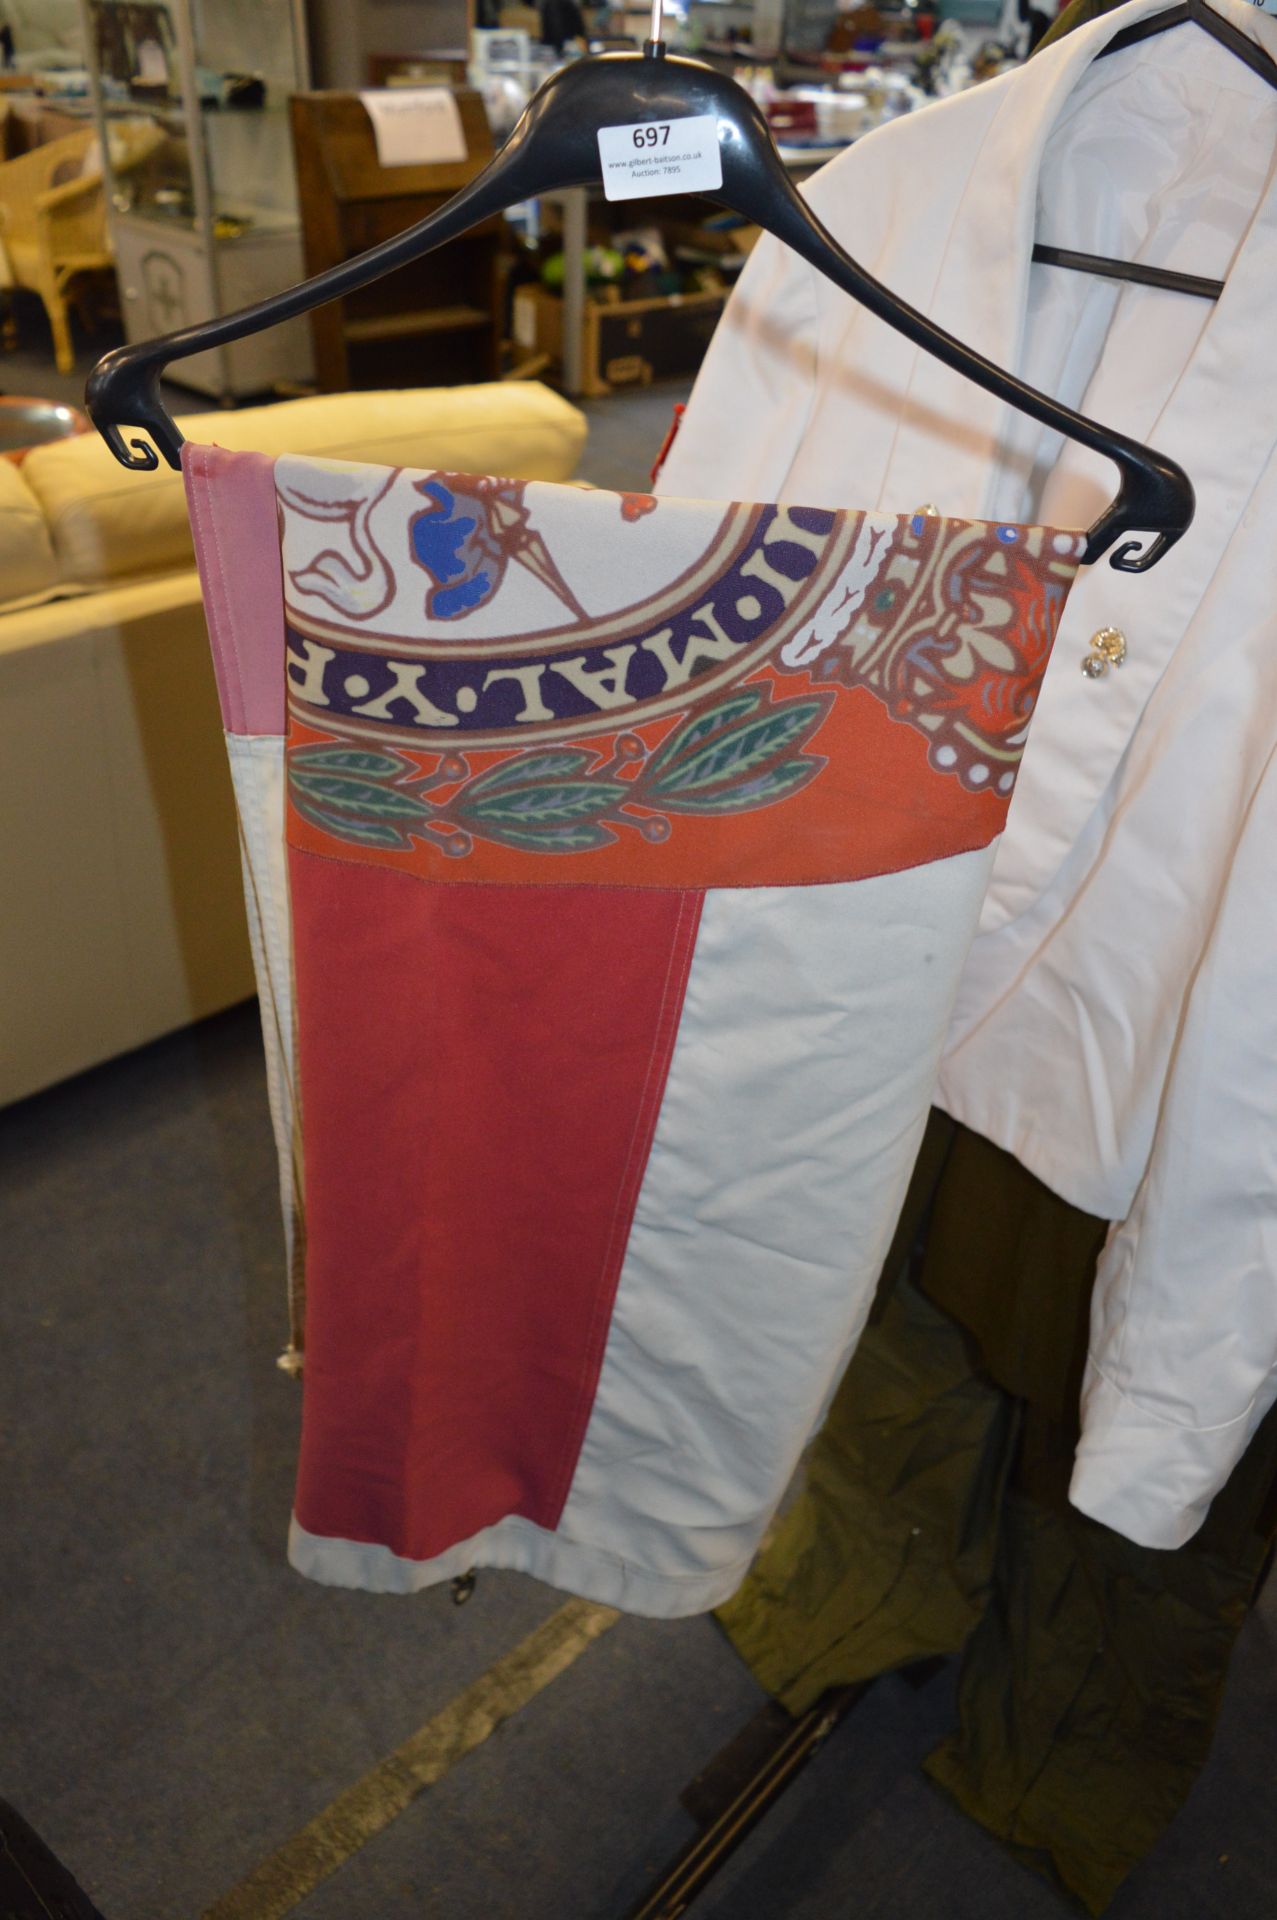 St George Flag with Fusiliers Emblem